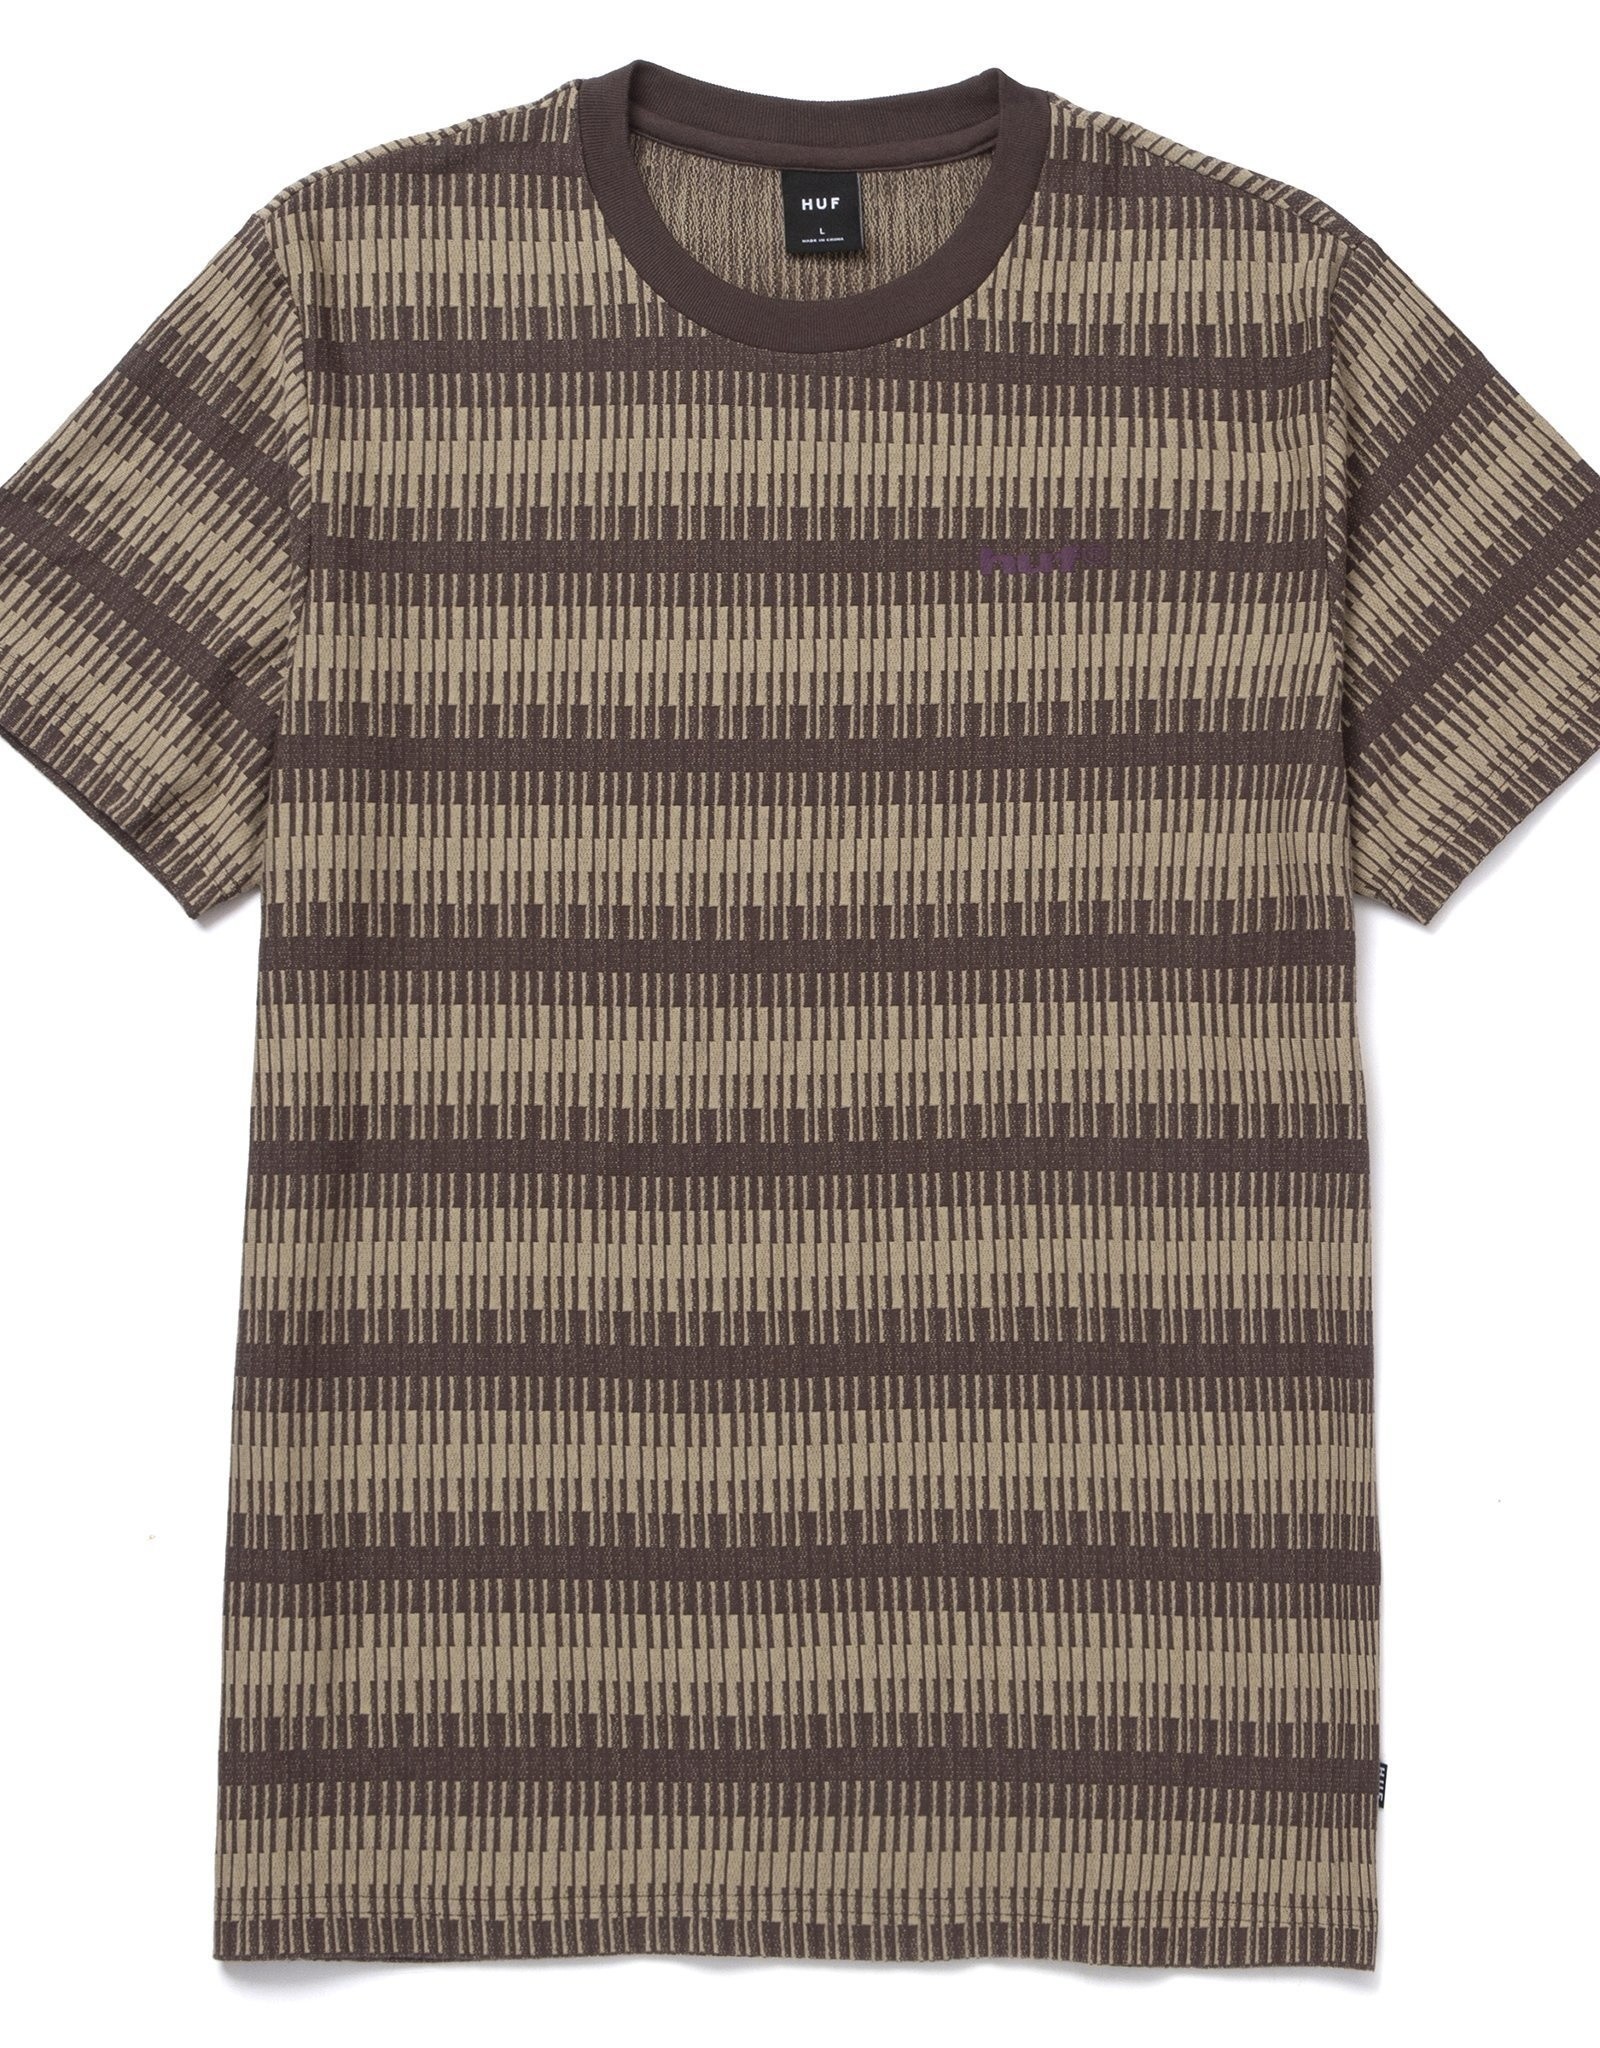 HUF SYNTHETIC STRIPE S/S KNIT TOP - CHOCOLATE BROWN